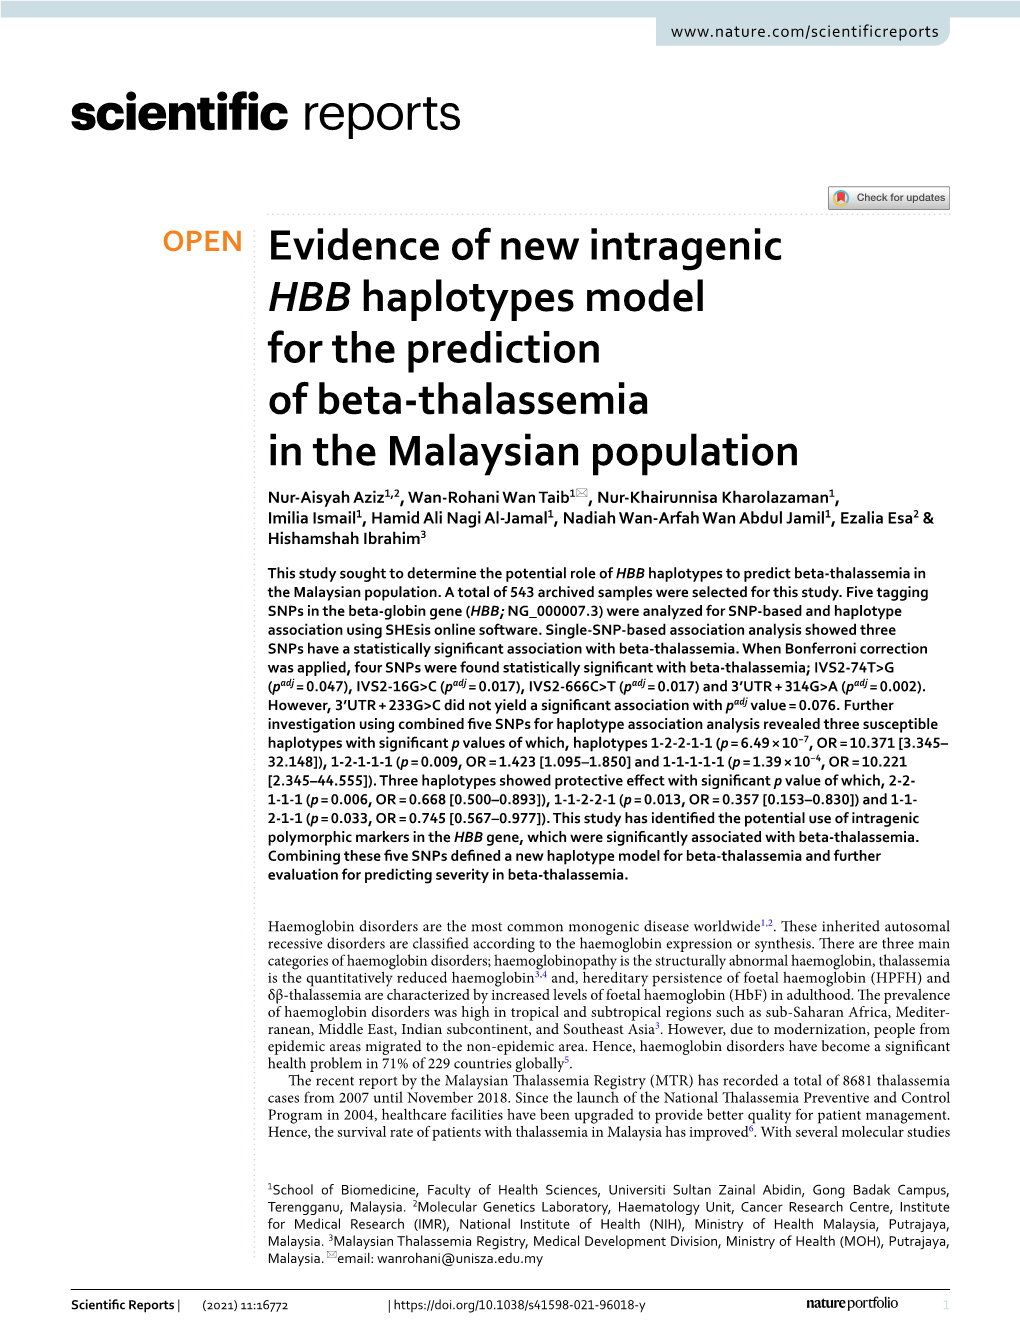 Evidence of New Intragenic HBB Haplotypes Model for the Prediction